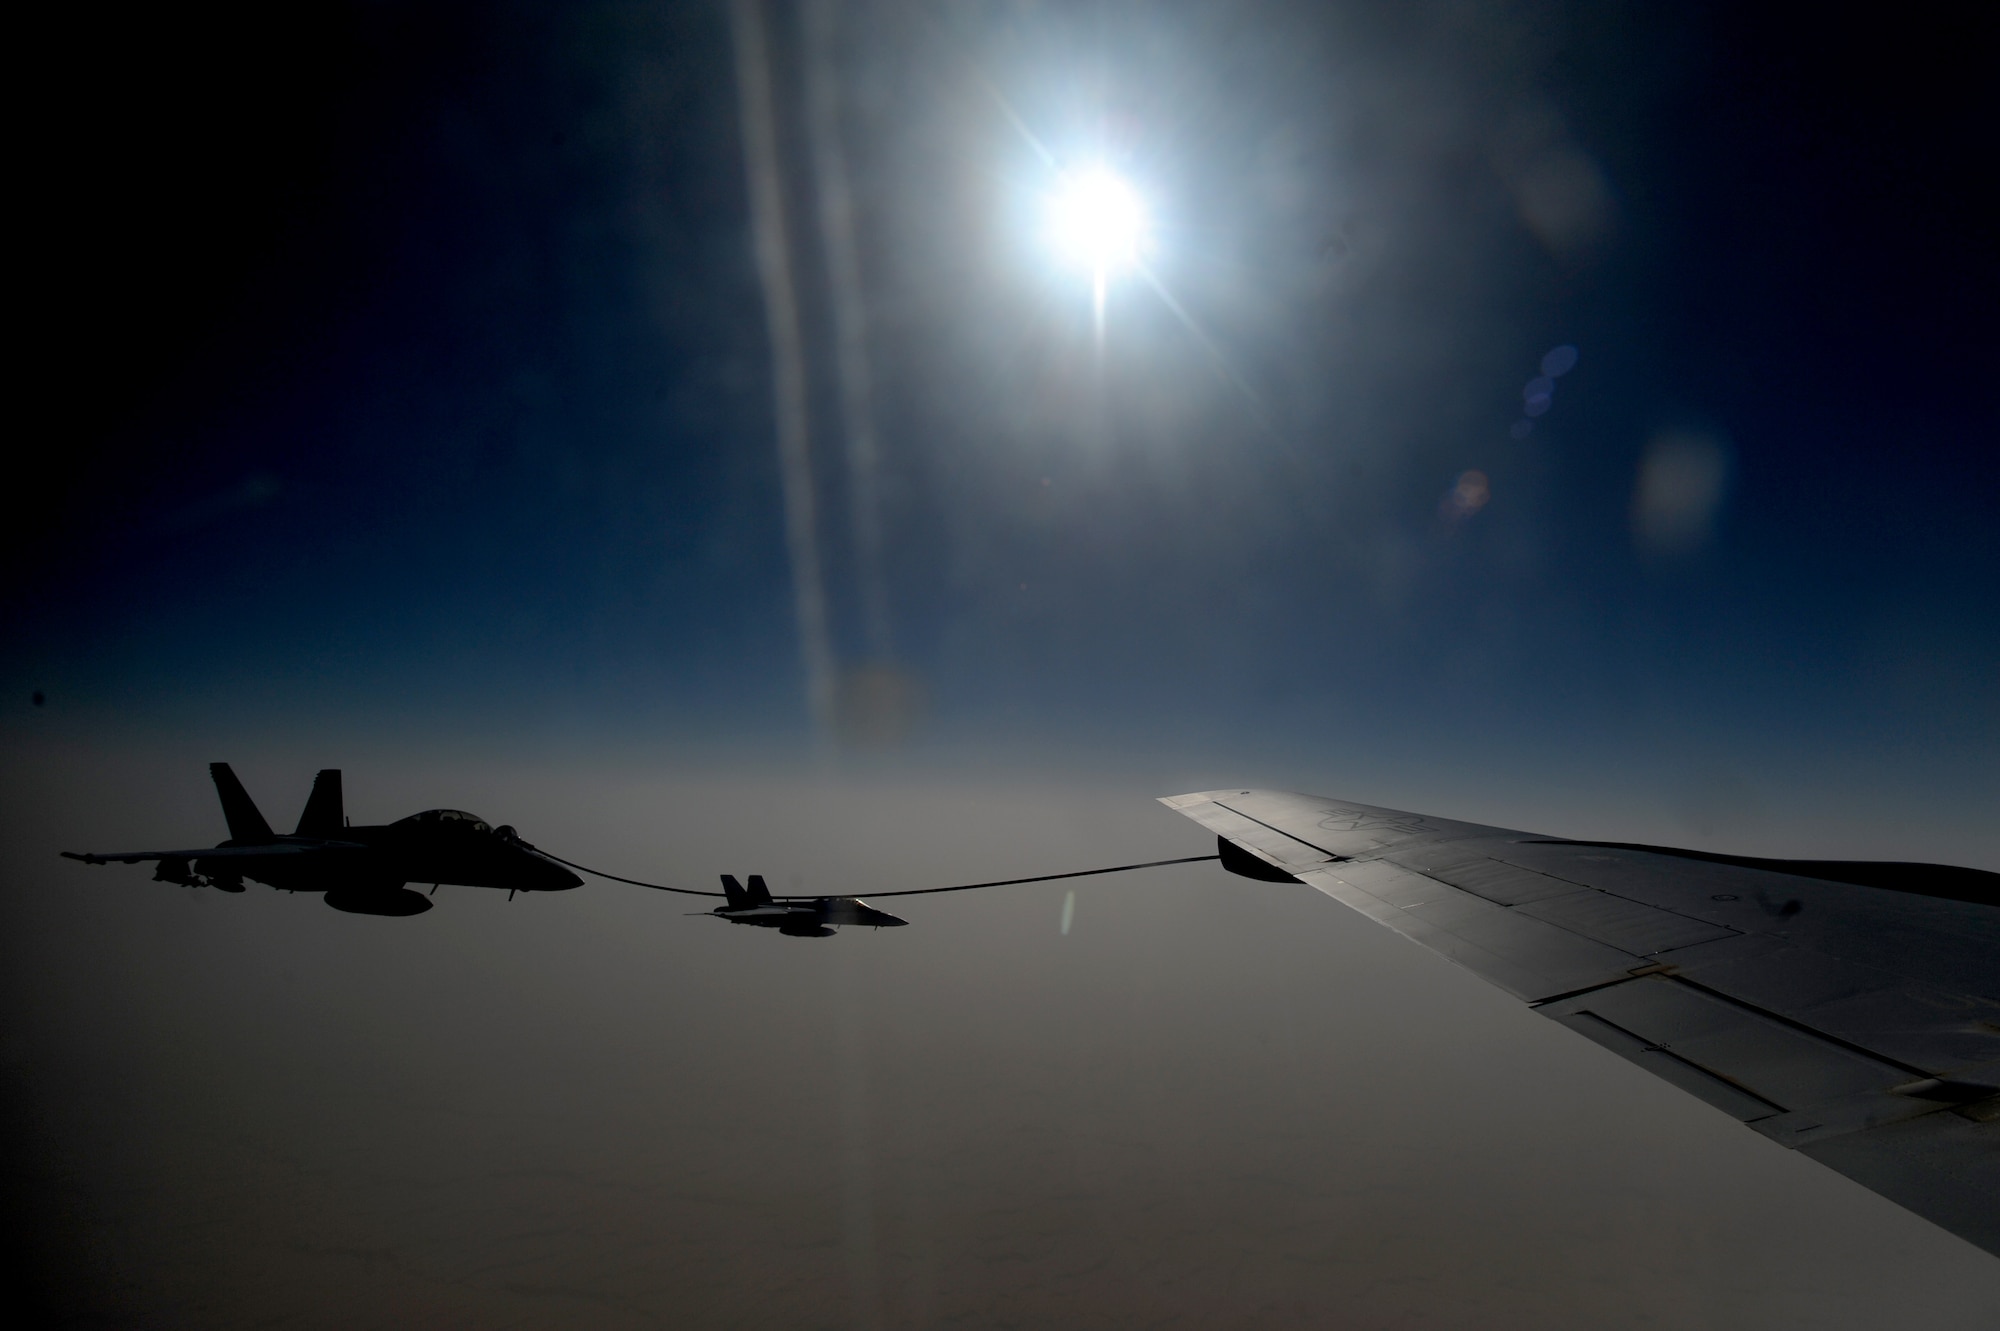 A U.S. Navy F/A-18 Super Hornet receives fuel via the multi-point refueling system on a KC-135 Stratotanker in the skies of Afghanistan during an air refueling mission supporting Operation Enduring Freedom. (U.S. Air Force photo/Master Sgt. William Greer)